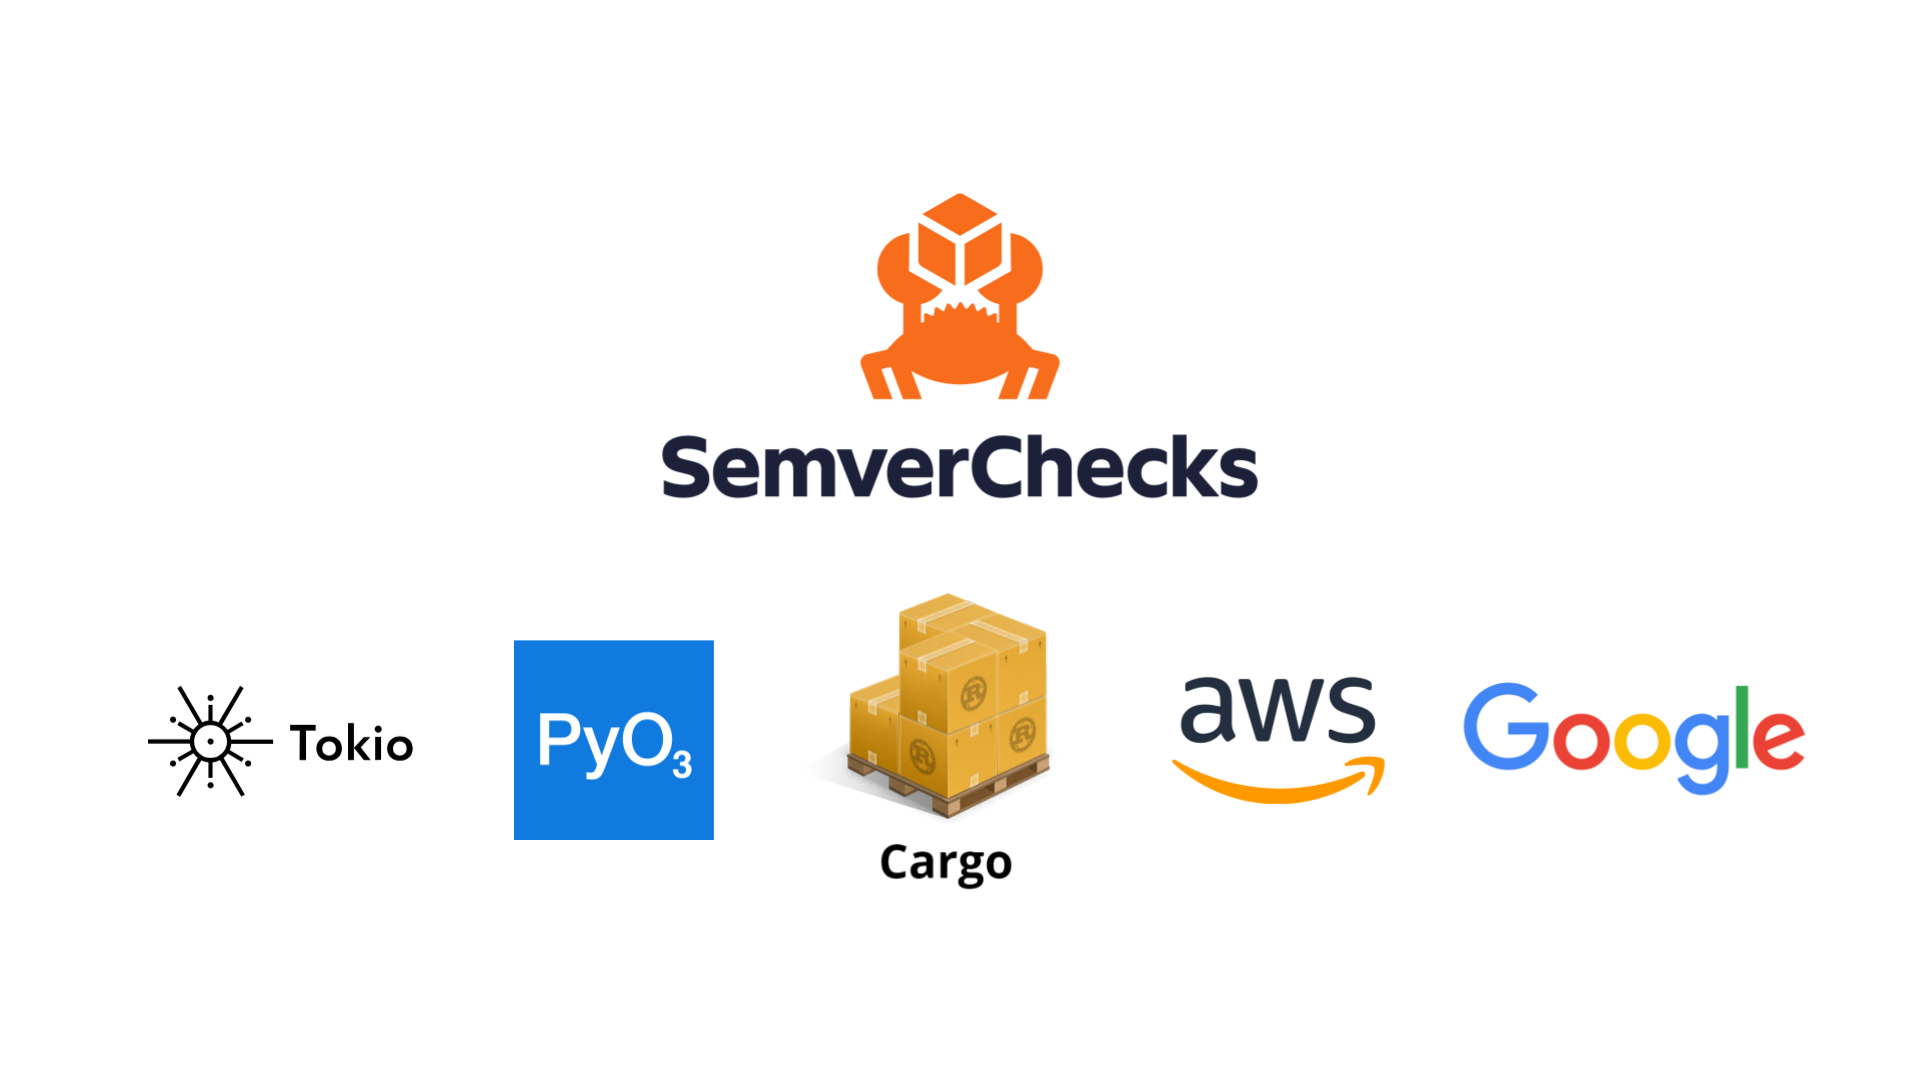 The cargo-semver-checks logo, joined by the logos of the tokio and PyO3 projects, the cargo tool's logo, and the logos of Amazon AWS and Google.